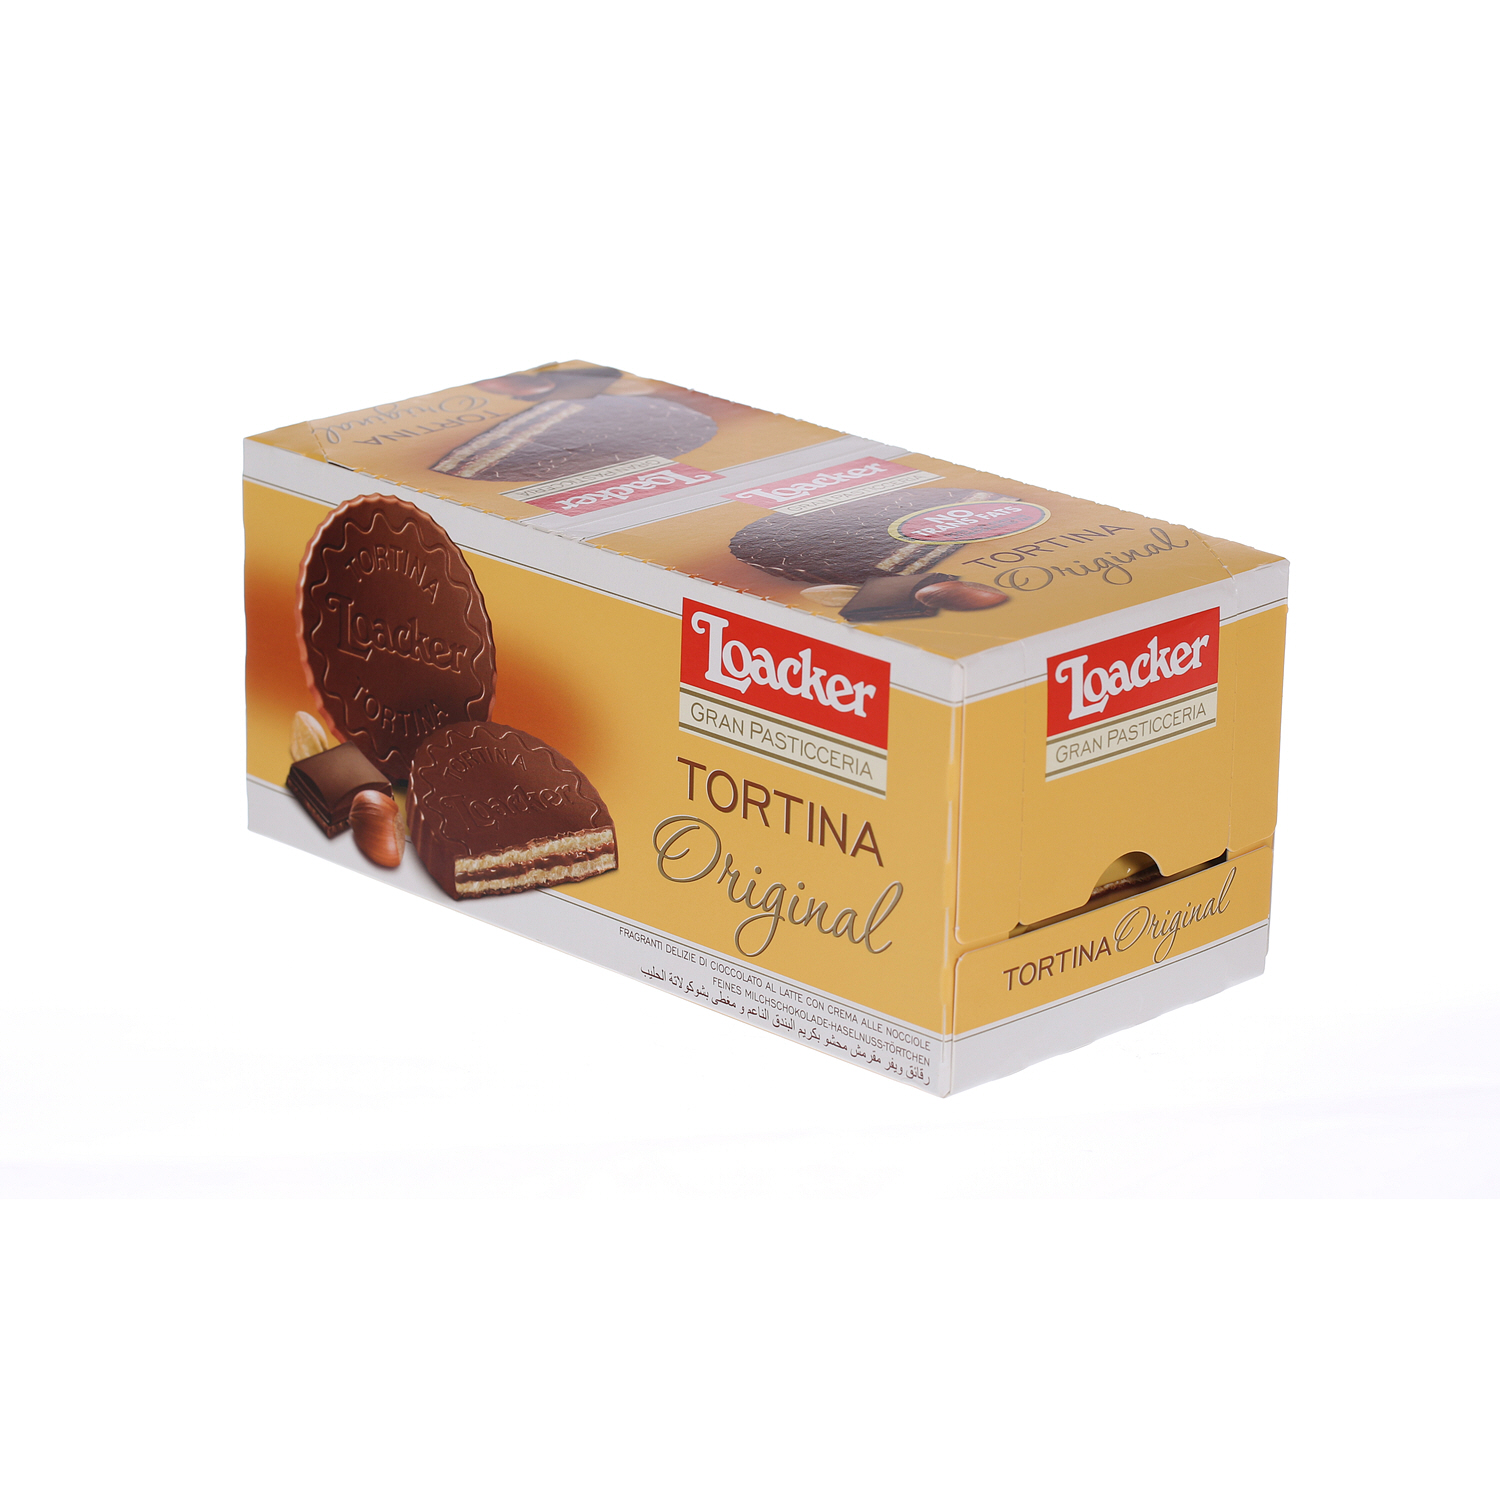 Loacker Tortina Chocolate Biscuits Sandwich 21 g × 24 Pieces